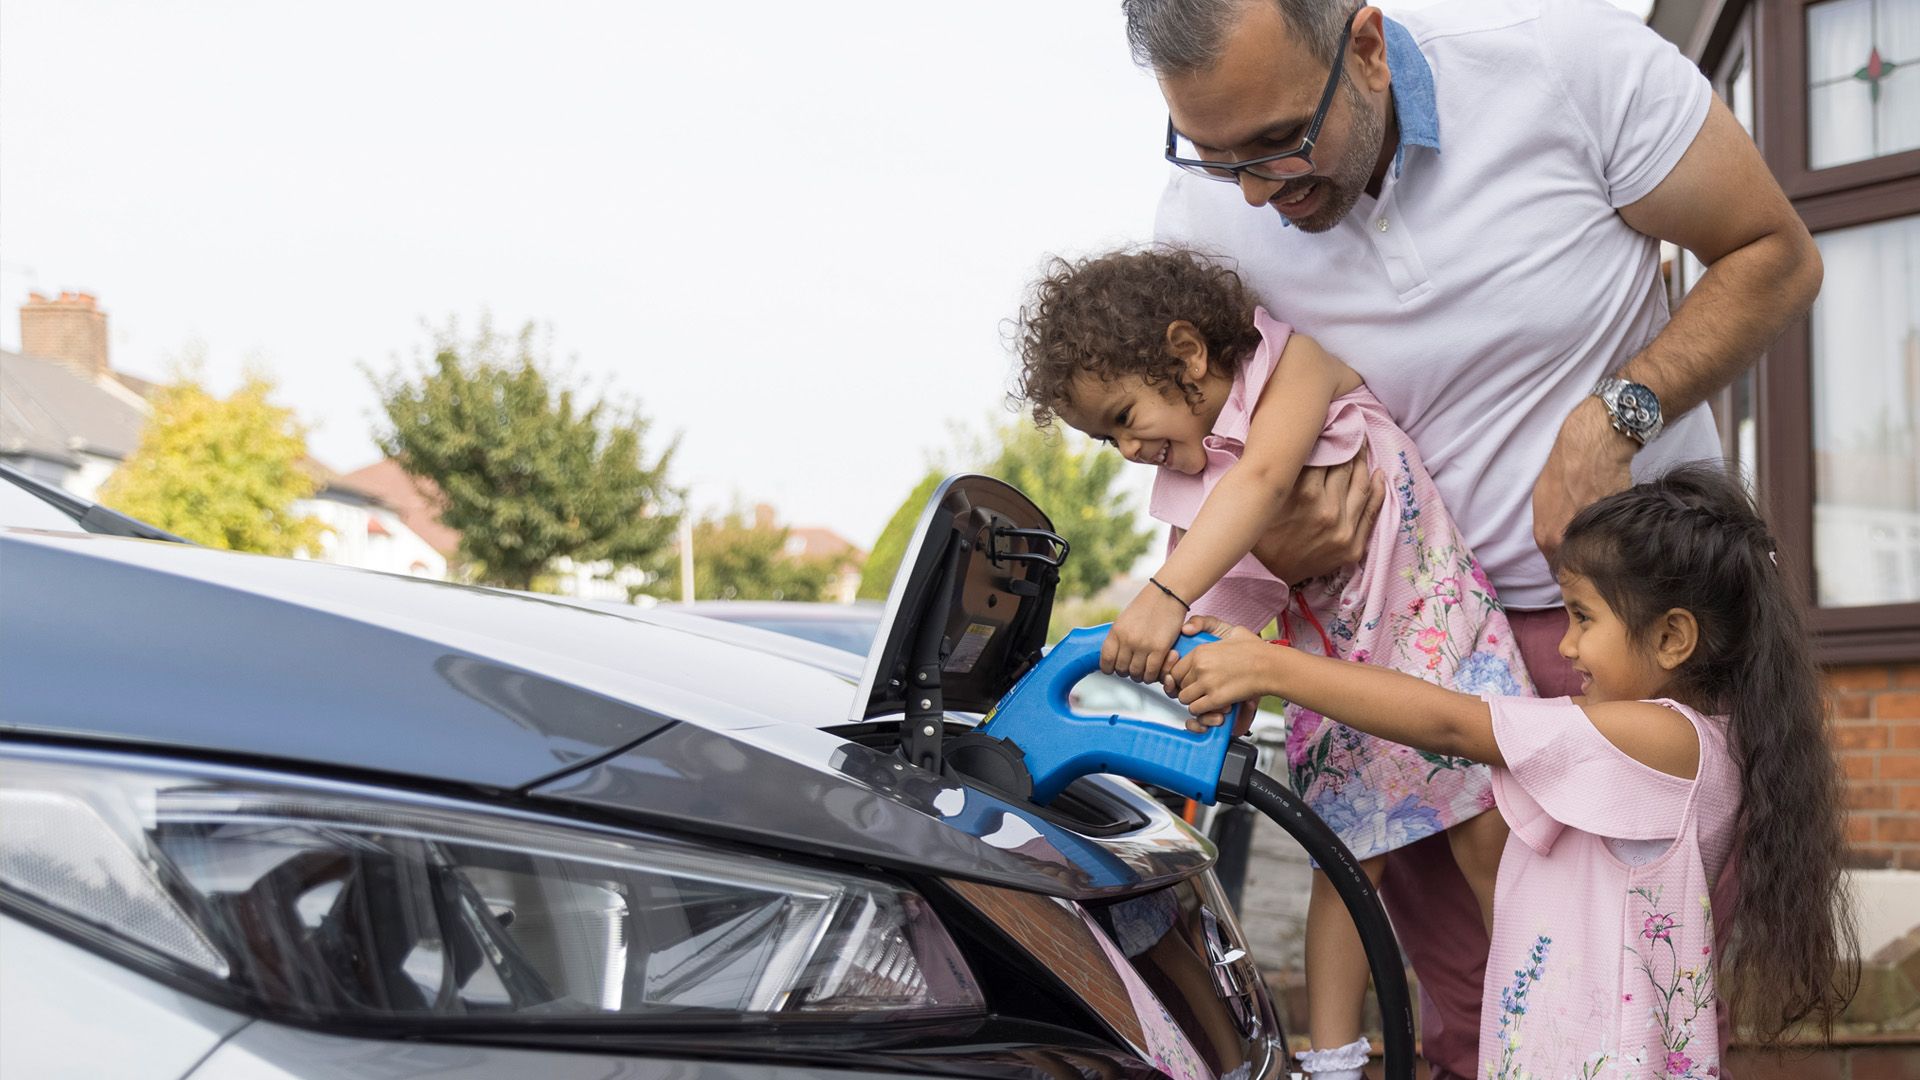 A person is holding a small child up to an electric vehicle to help them charge and a second child is standing on the ground holding on to the electric vehicle charger as well